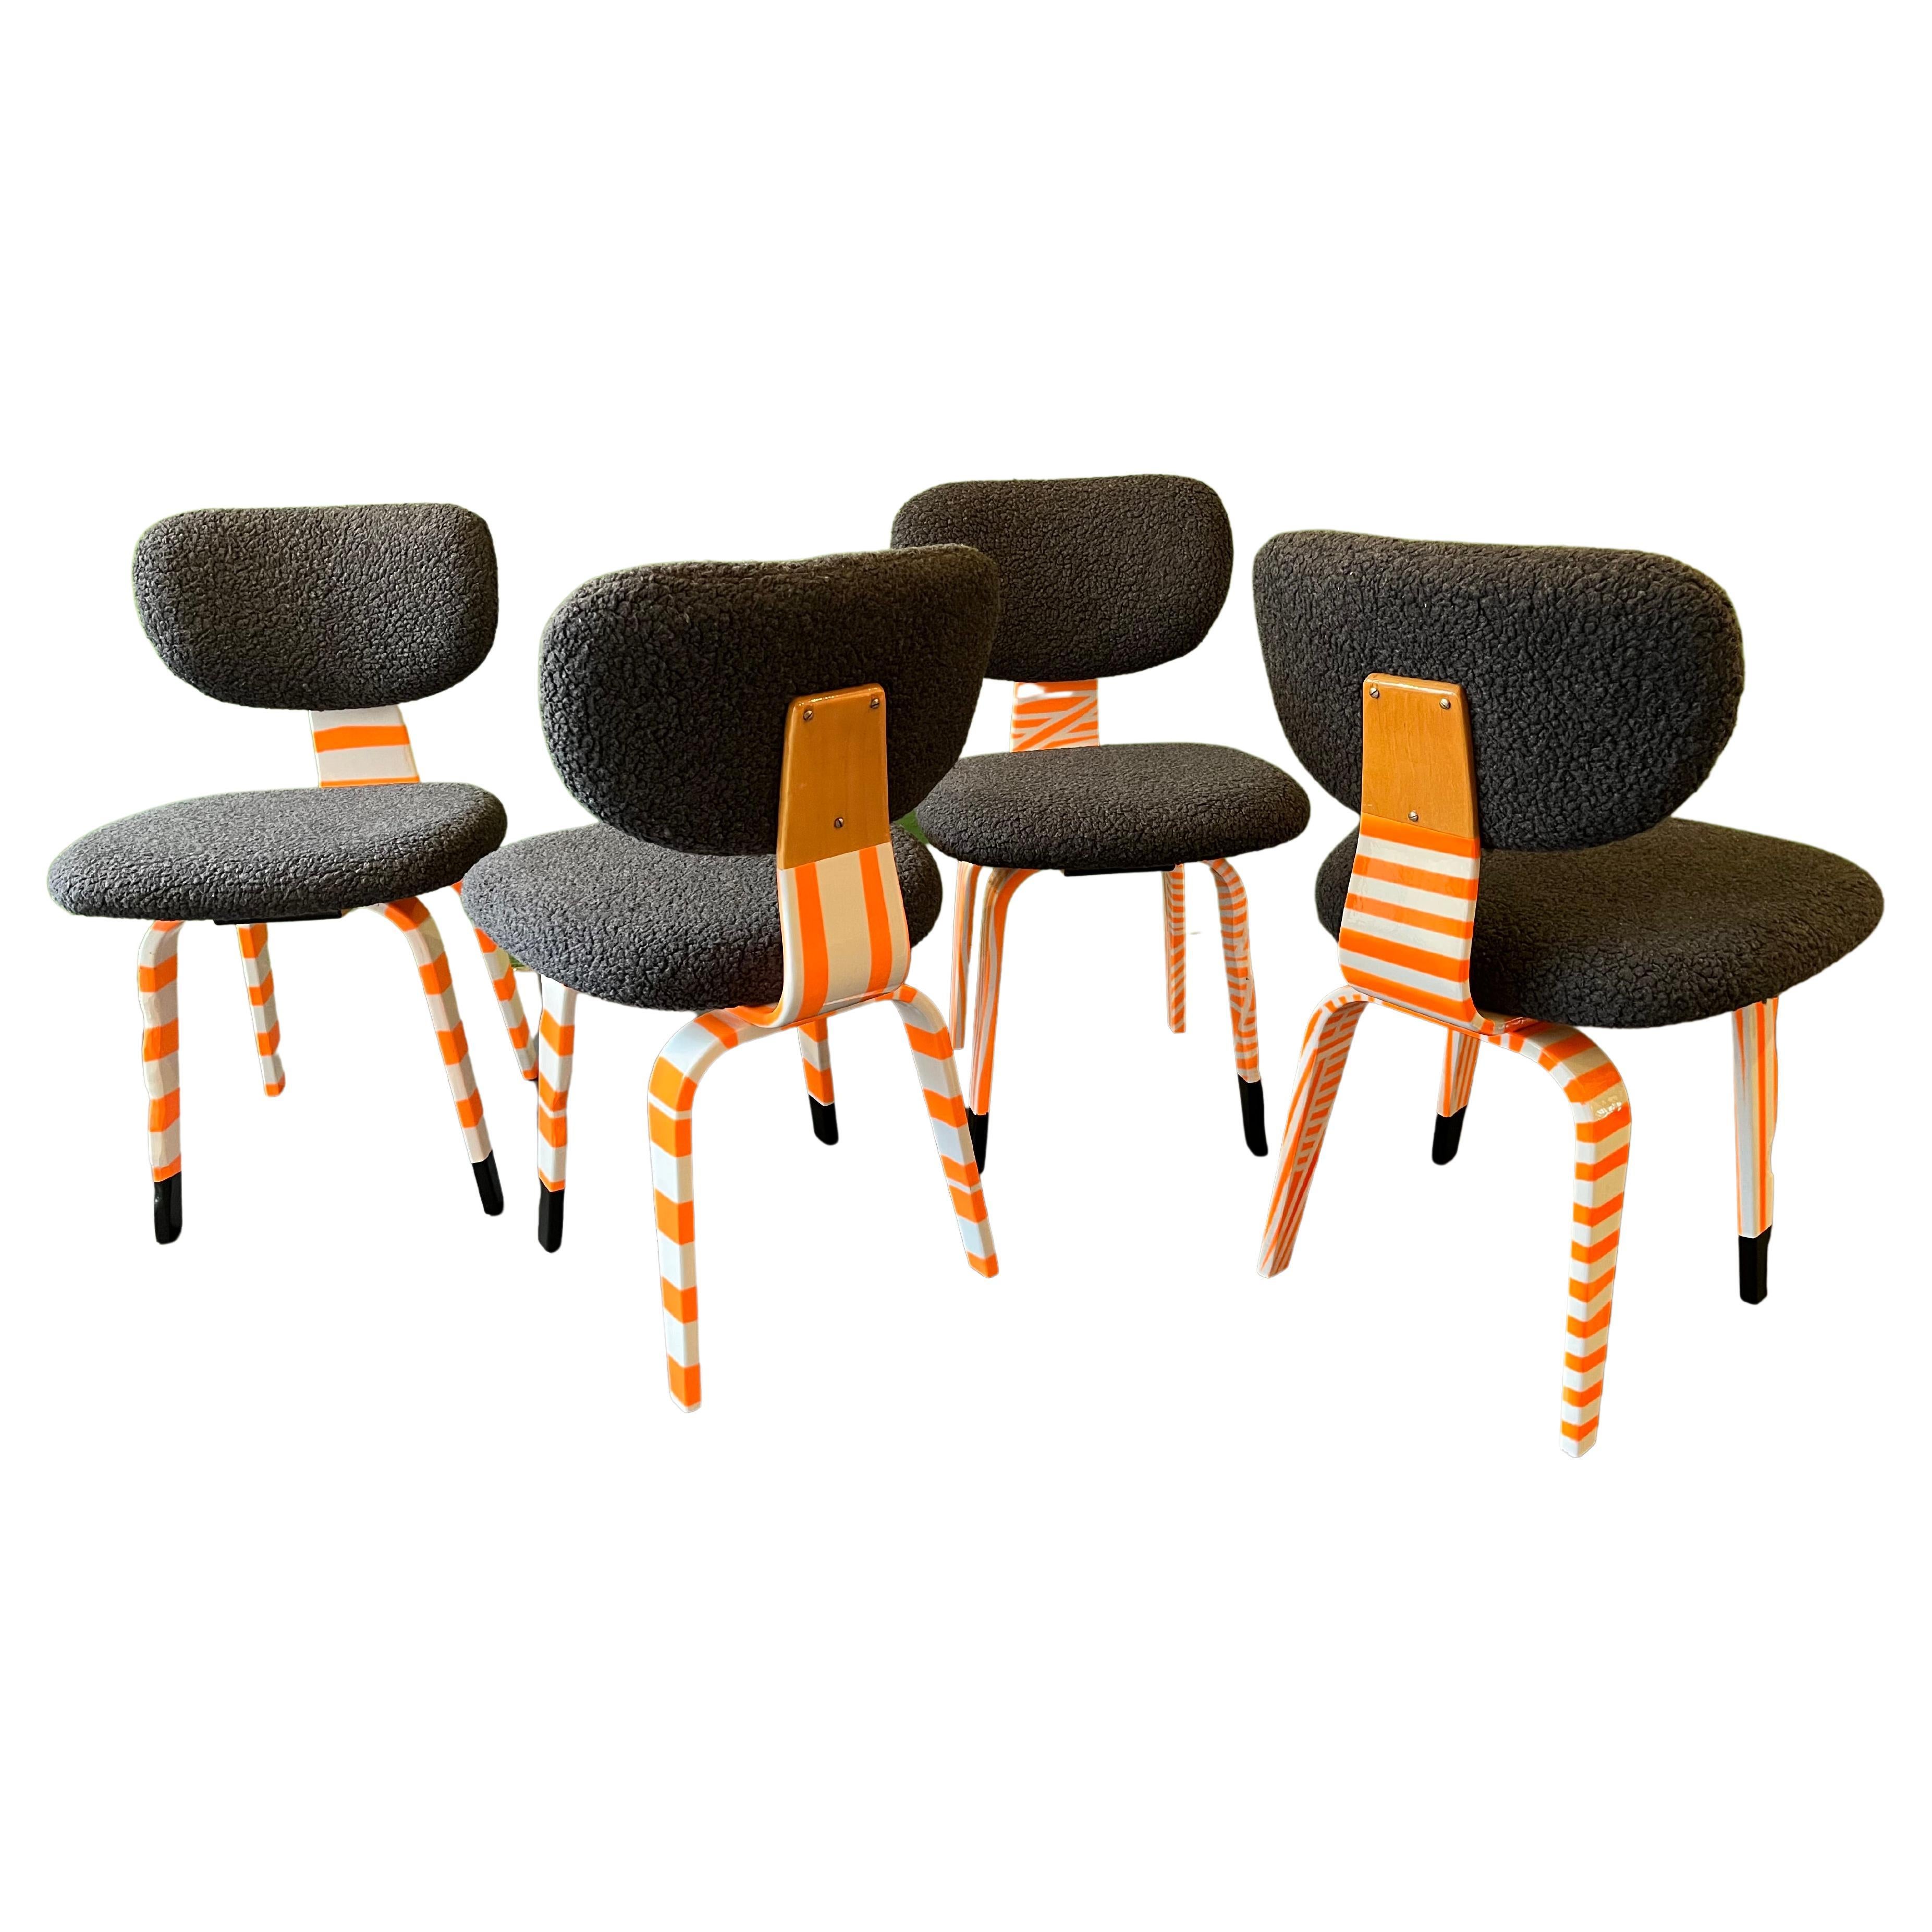 Four Black Sheep Dining Chairs by Markus Friedrich Staab